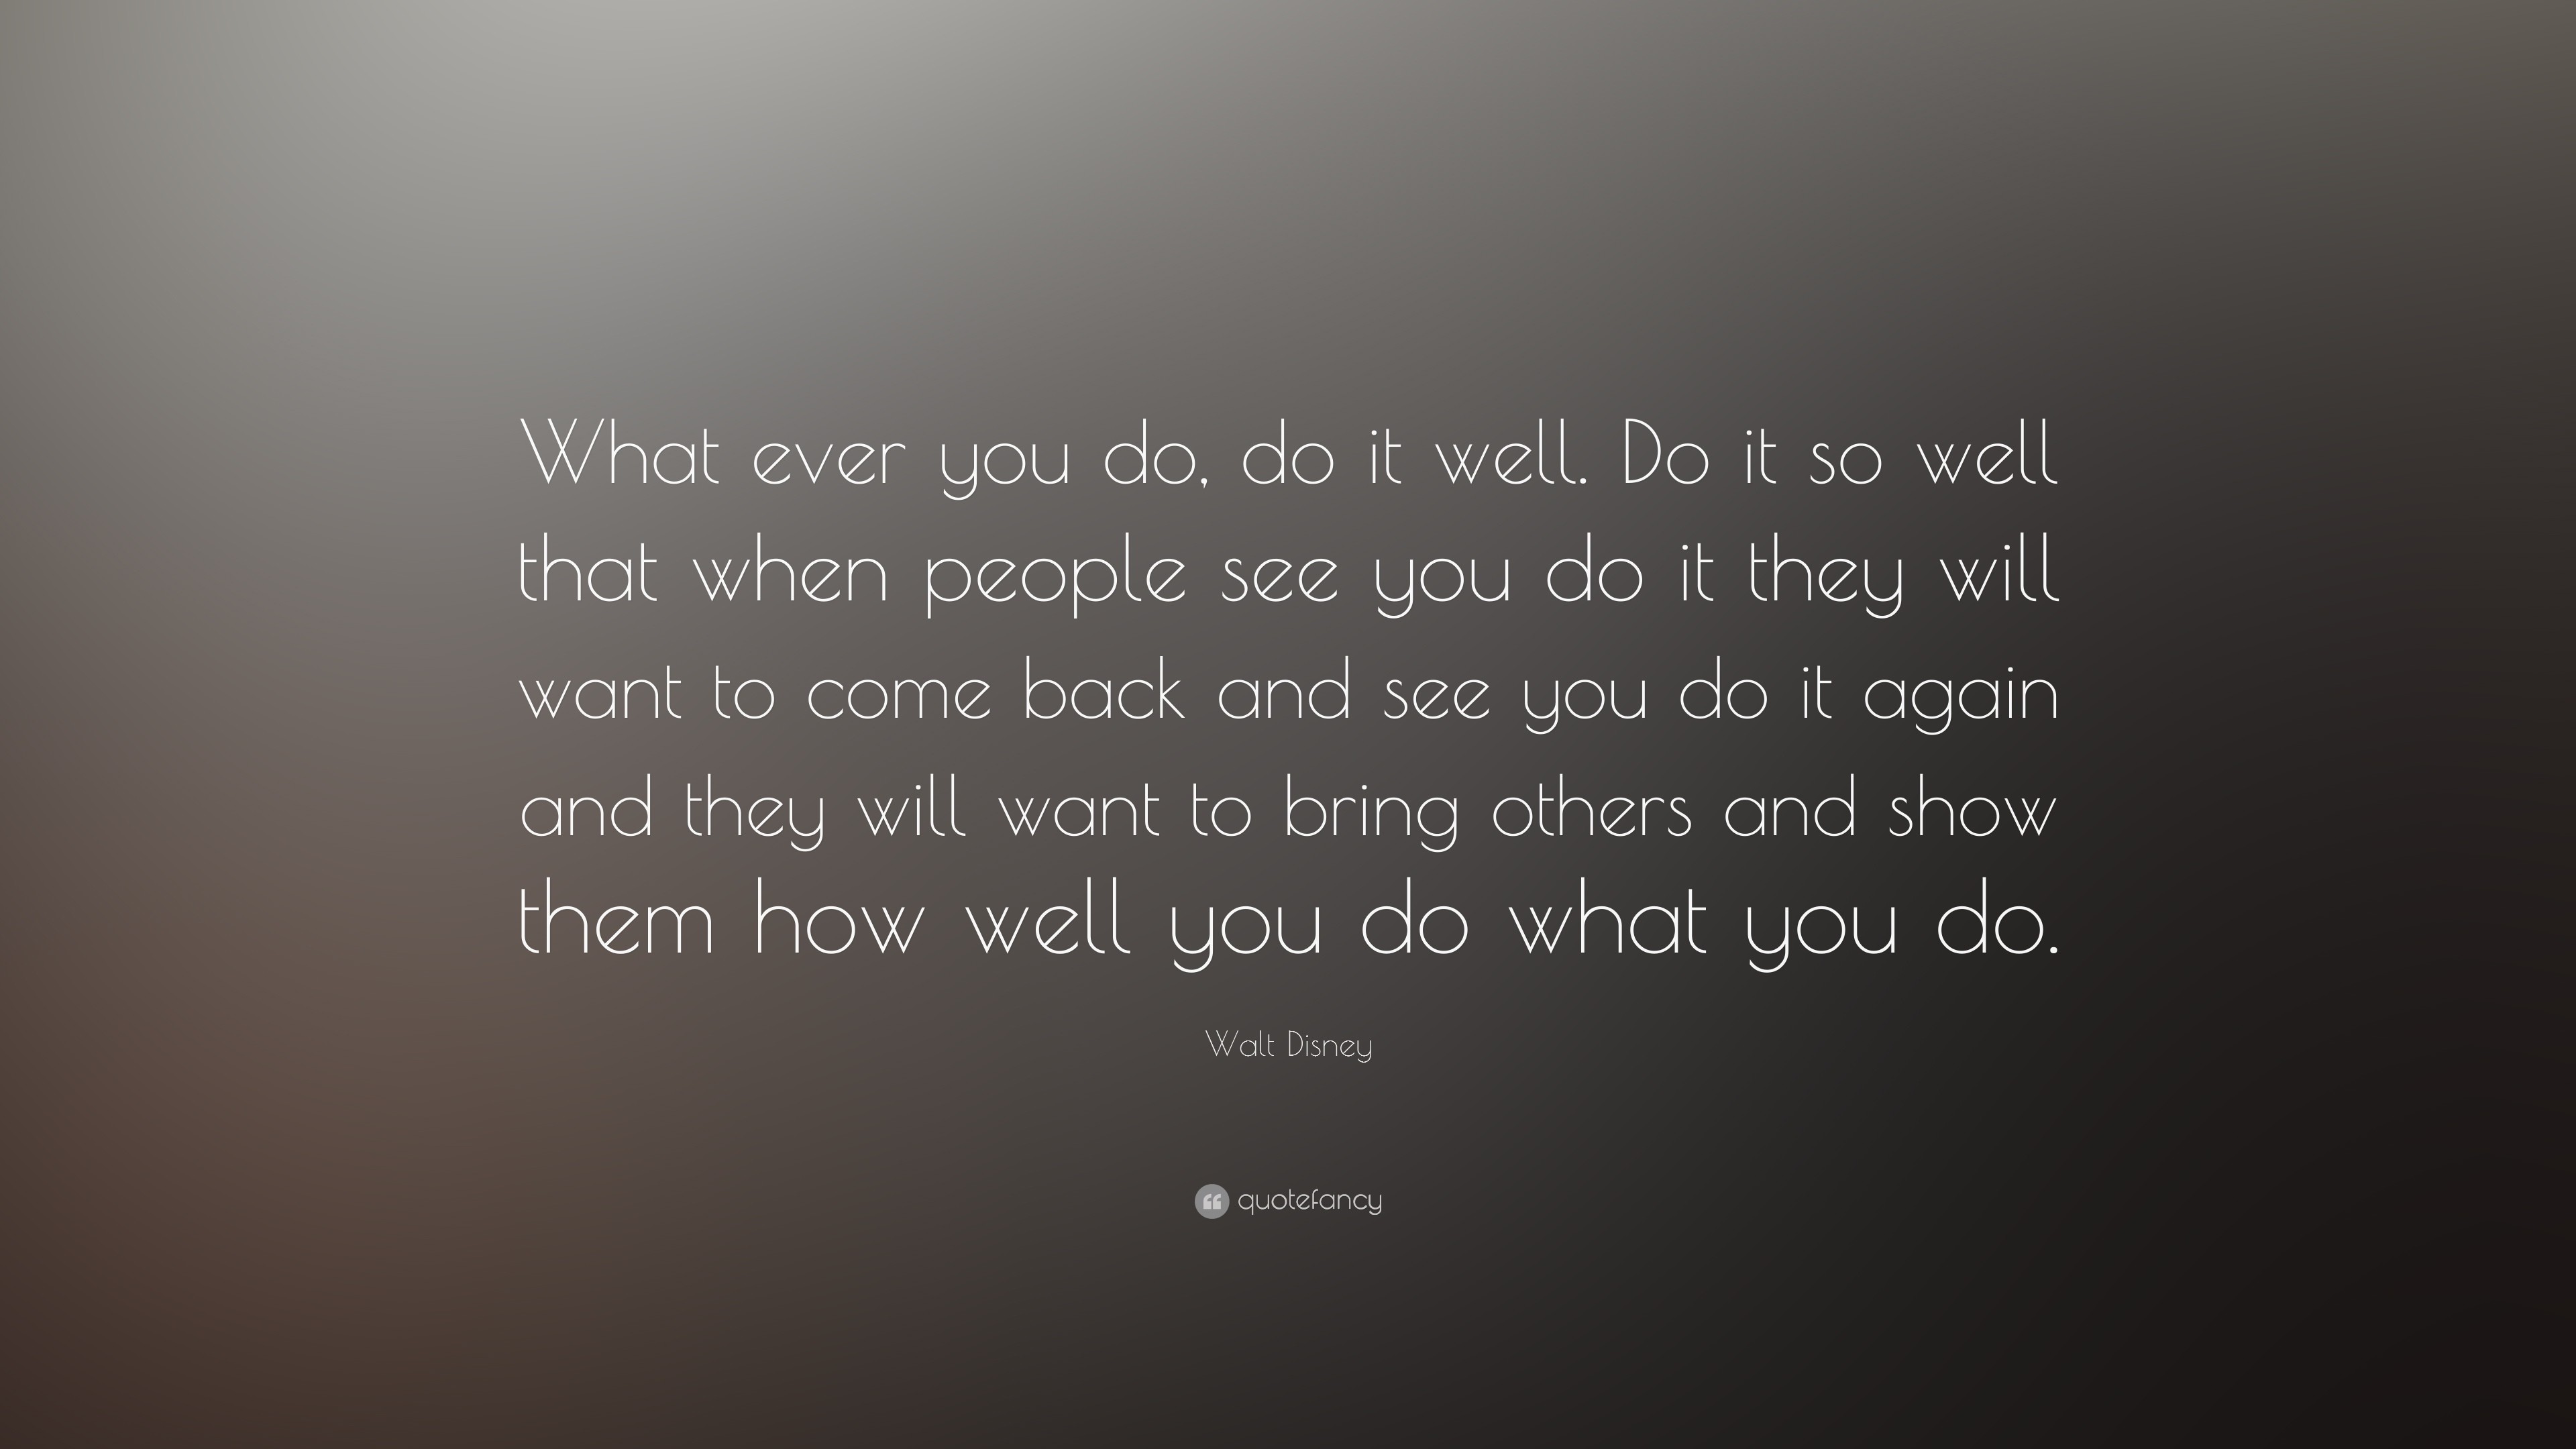 3840x2160 Walt Disney Quote: “What ever you do, do it well. Do it